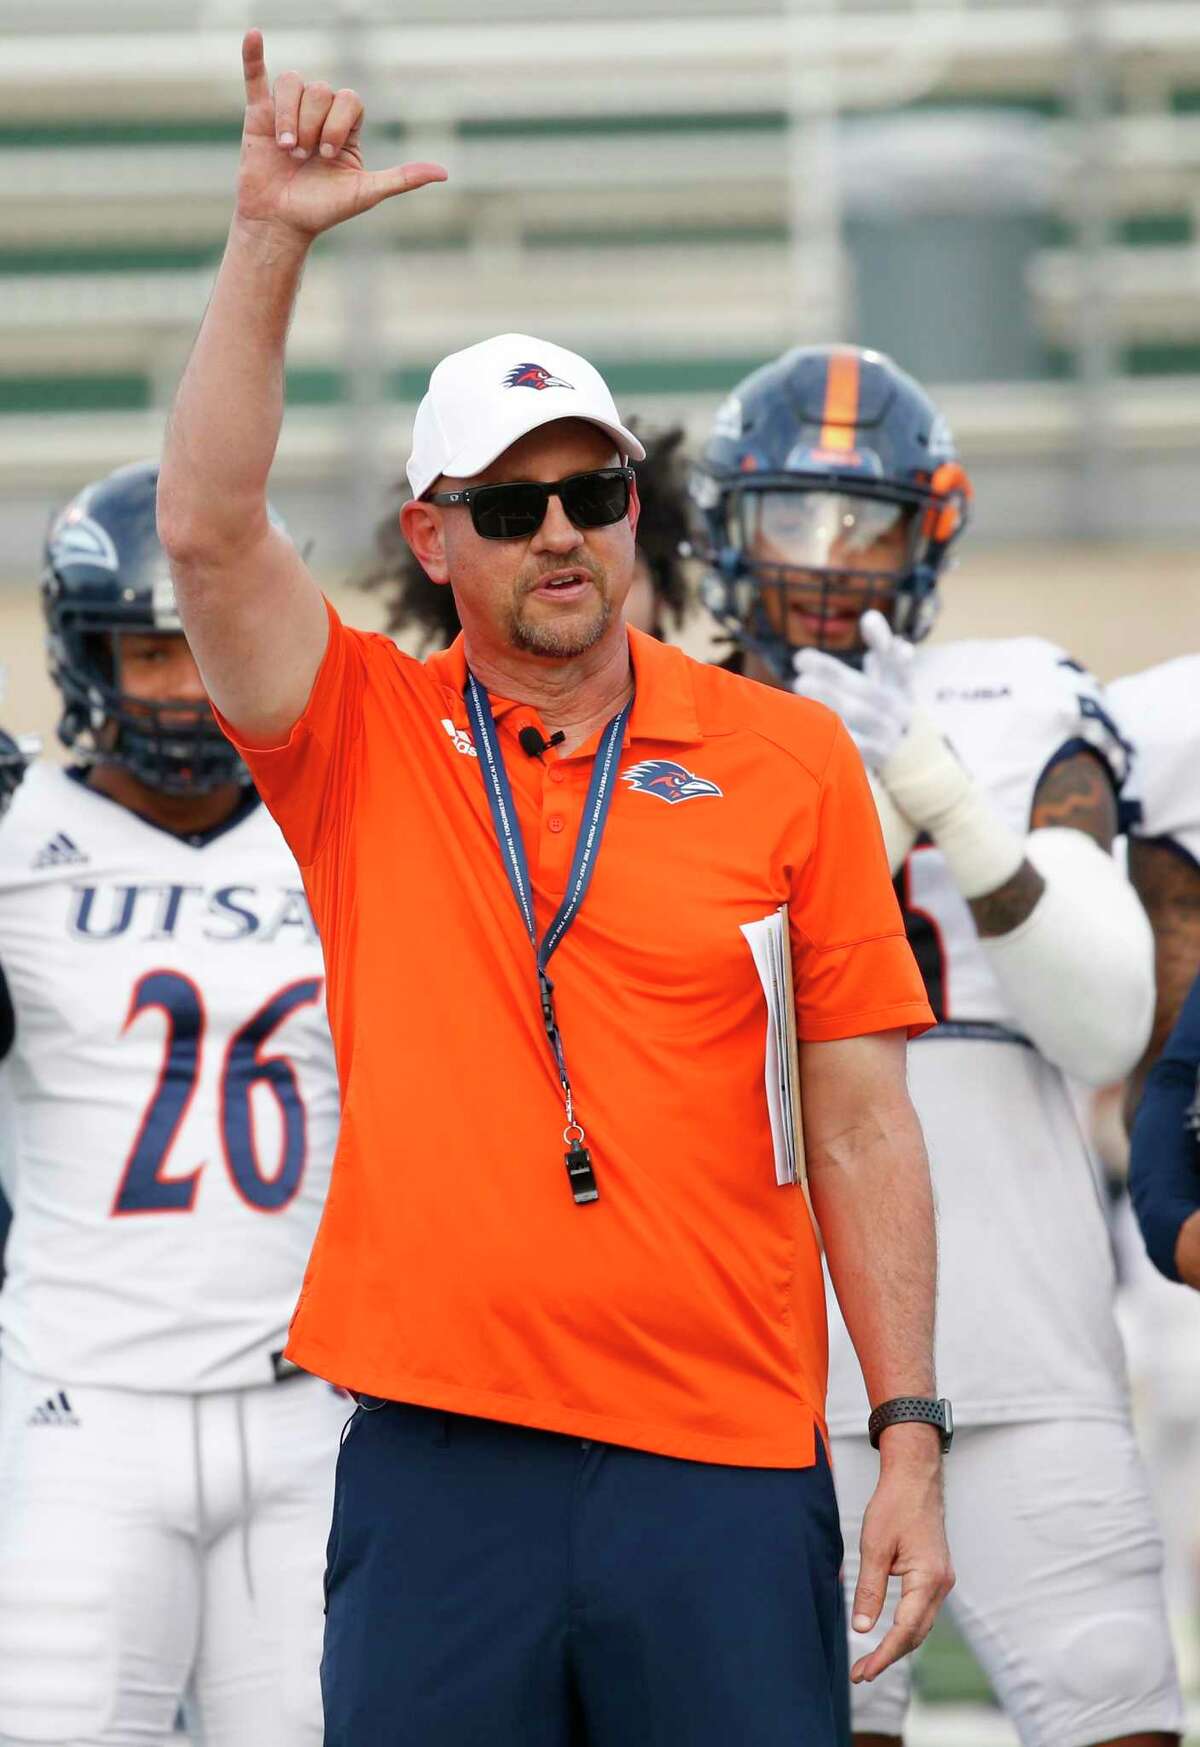 UTSA head coach Jeff Traylor acknowledges the crowd after it was announced that he has been voted the Conference USA Coach of the Year. UTSA Spring football game on Thursday, April 14, 2022 at Farris Stadium